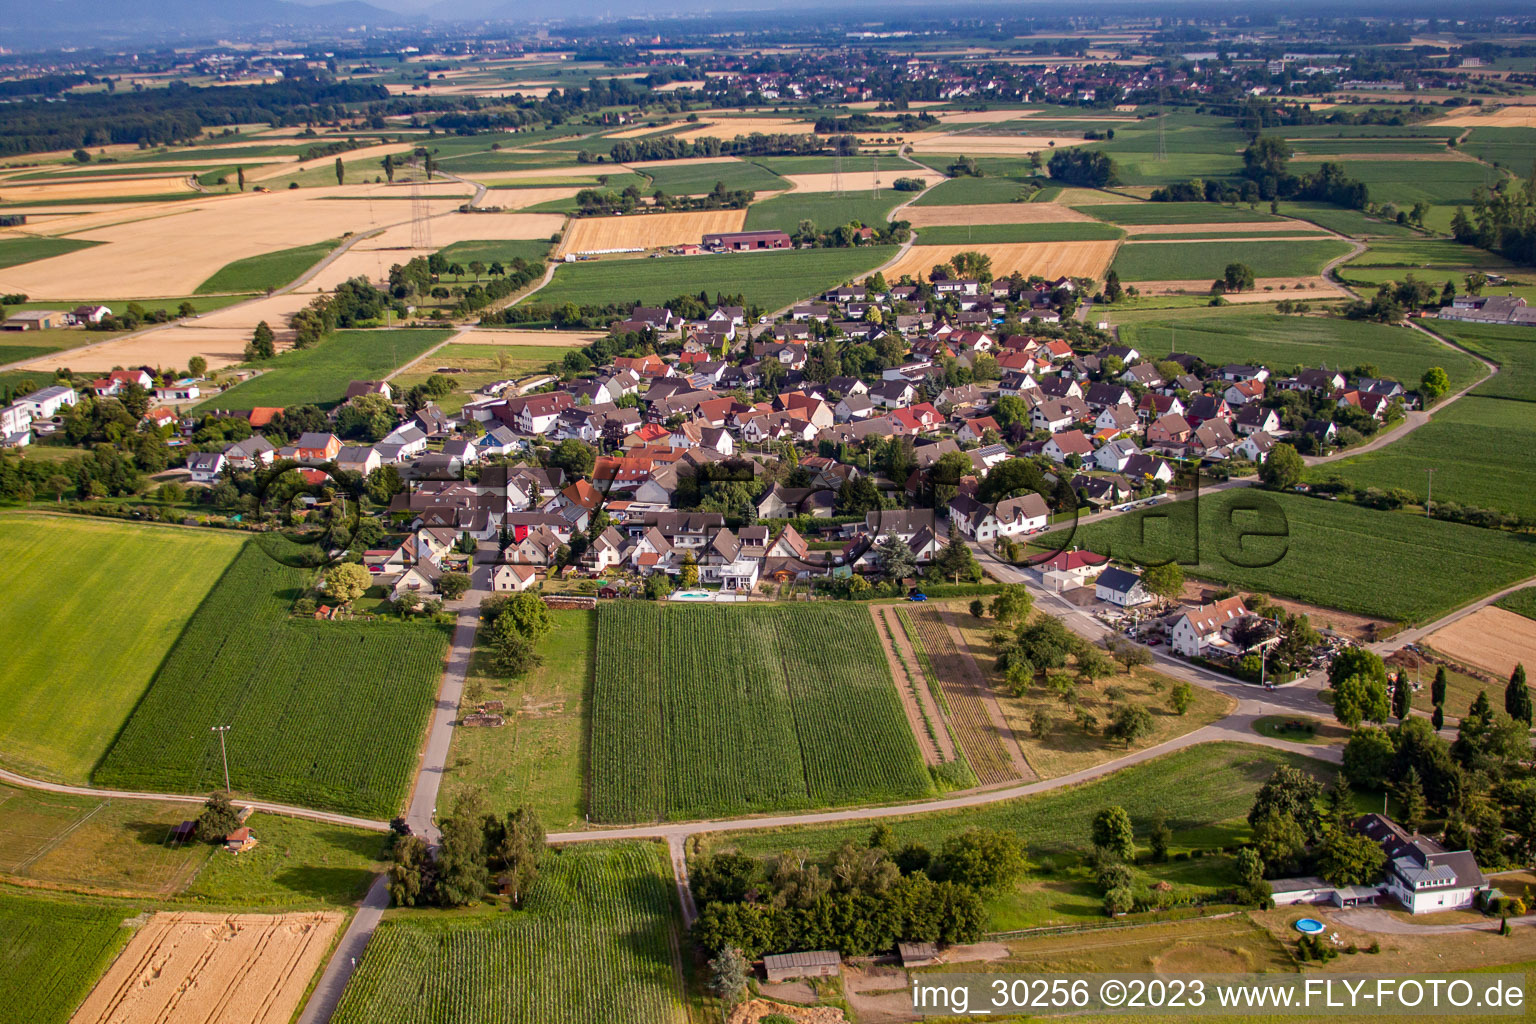 From the north in the district Querbach in Kehl in the state Baden-Wuerttemberg, Germany